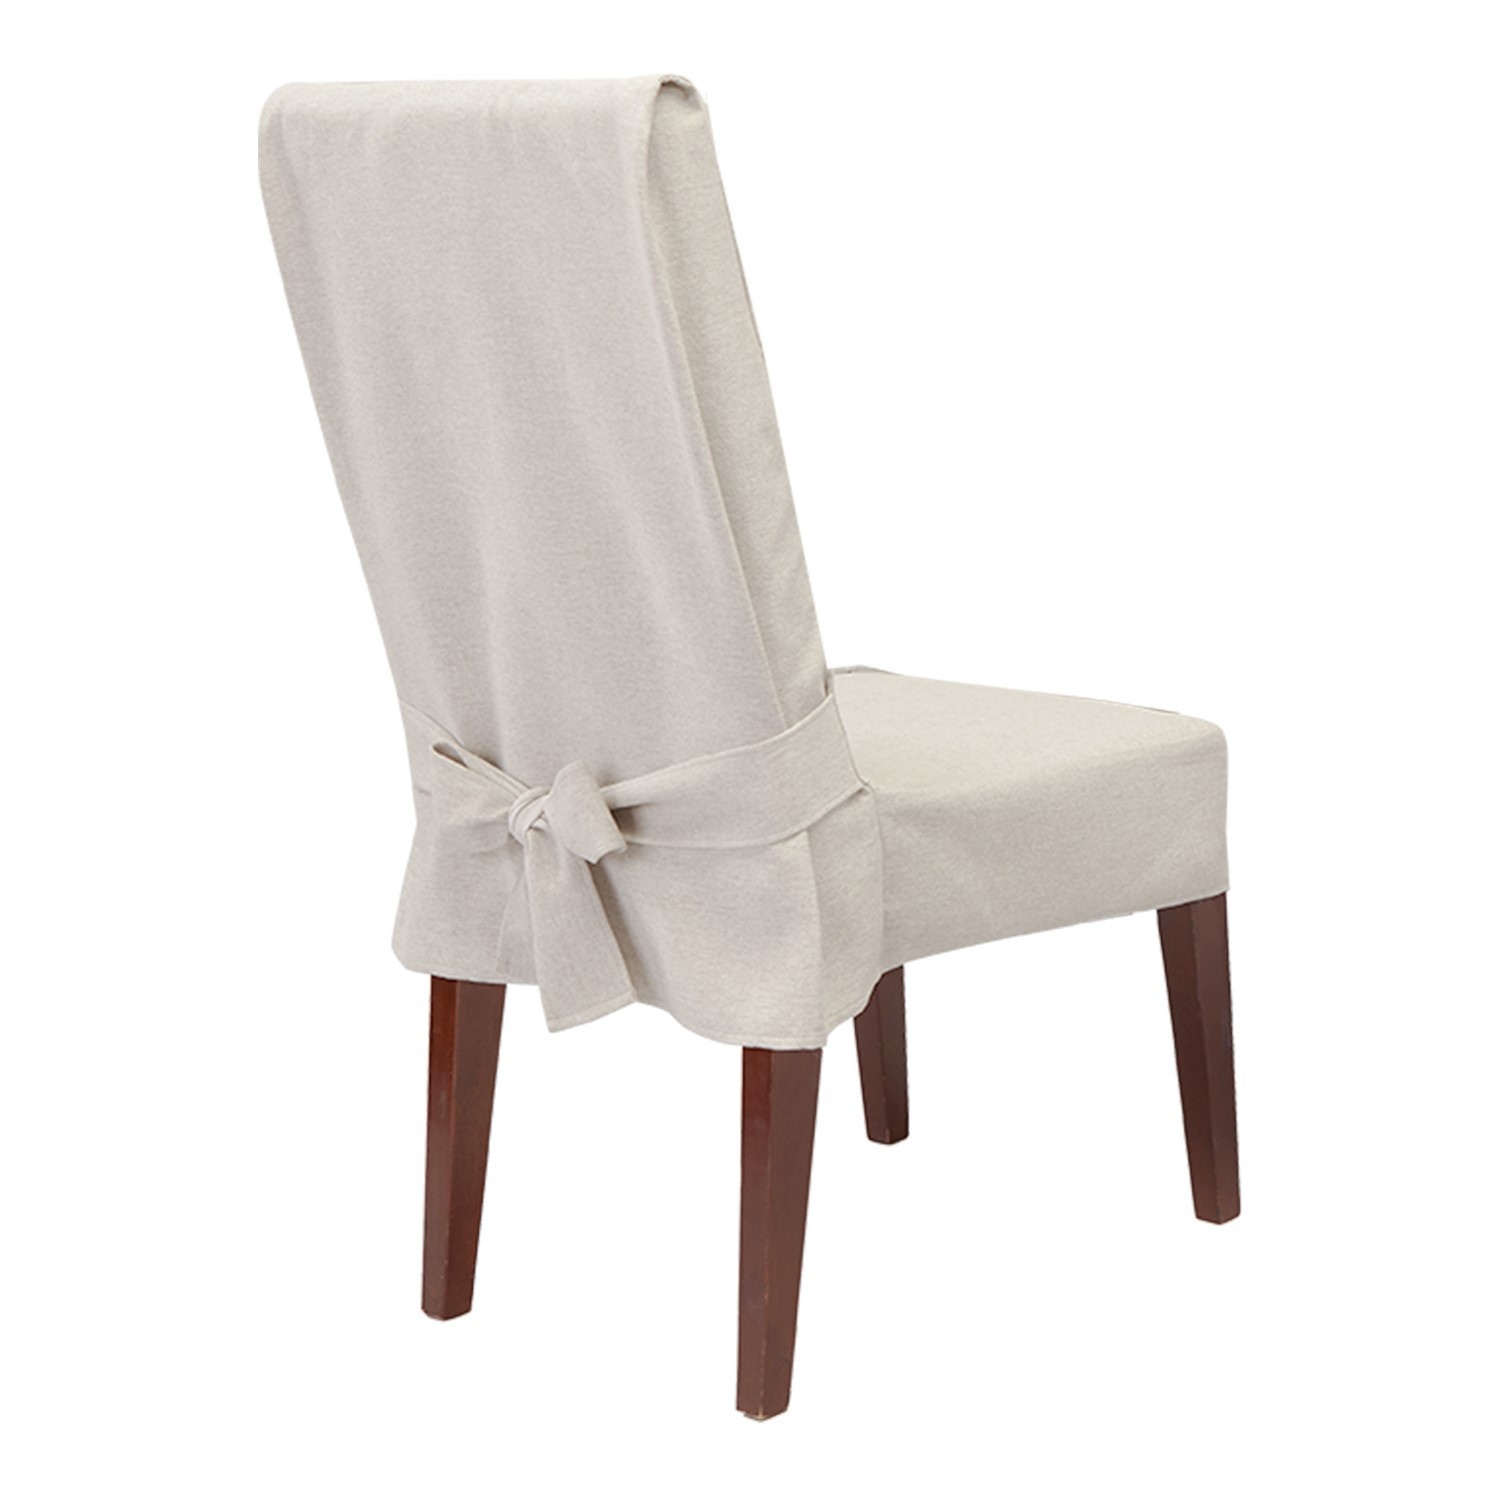 slide 1 of 3, Farmhouse Basketweave Dining Room Chair Slipcover Oatmeal - Sure Fit, 1 ct